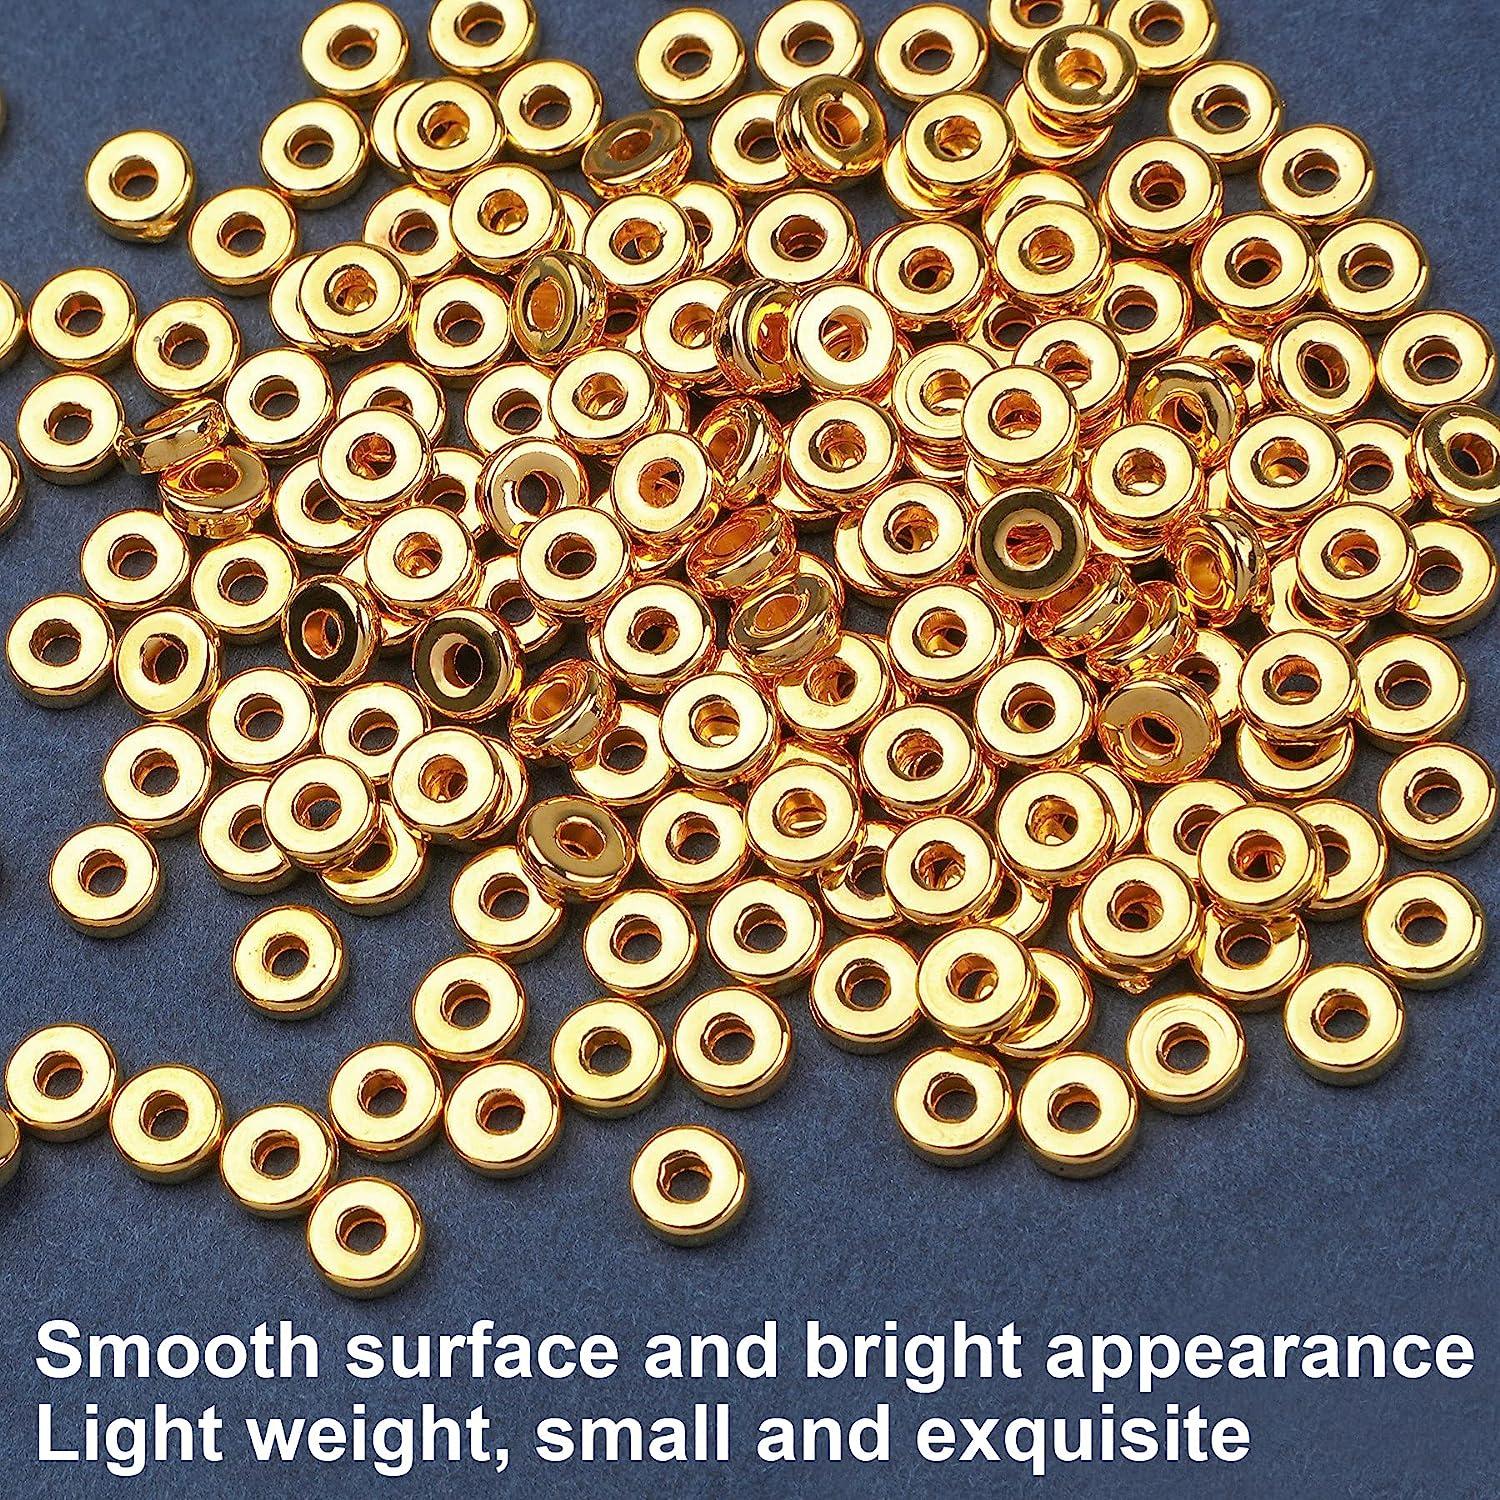 1500pcs 6mm Gold Flat Round Spacer Beads Disc Loose Jewelry Making